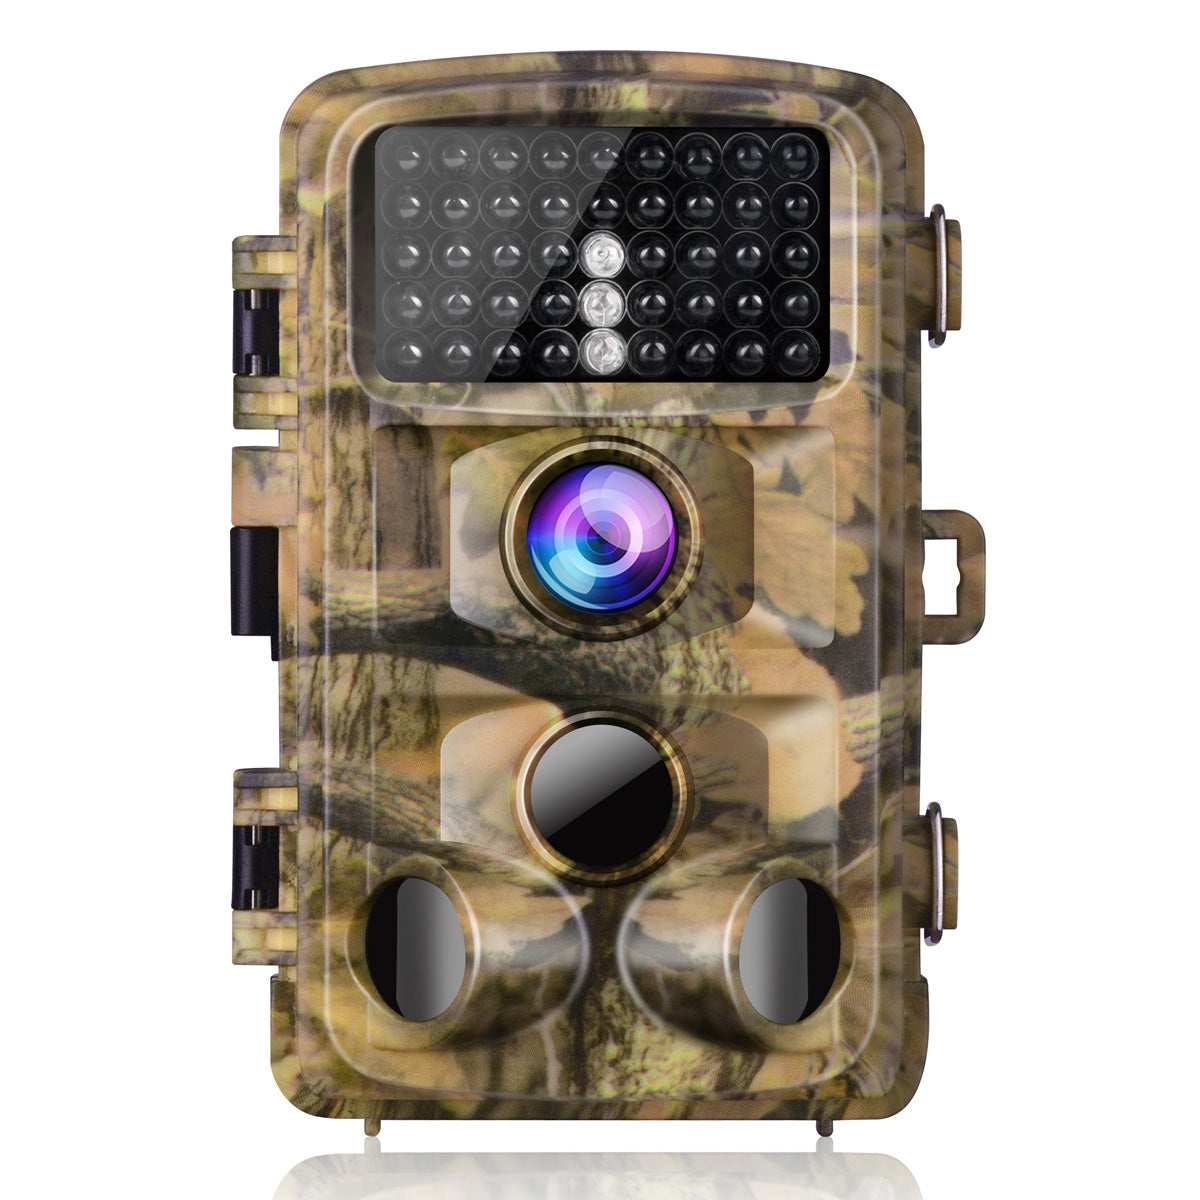 Campark T45A 16MP 1080P Trail Camera With Infrared Night Vision